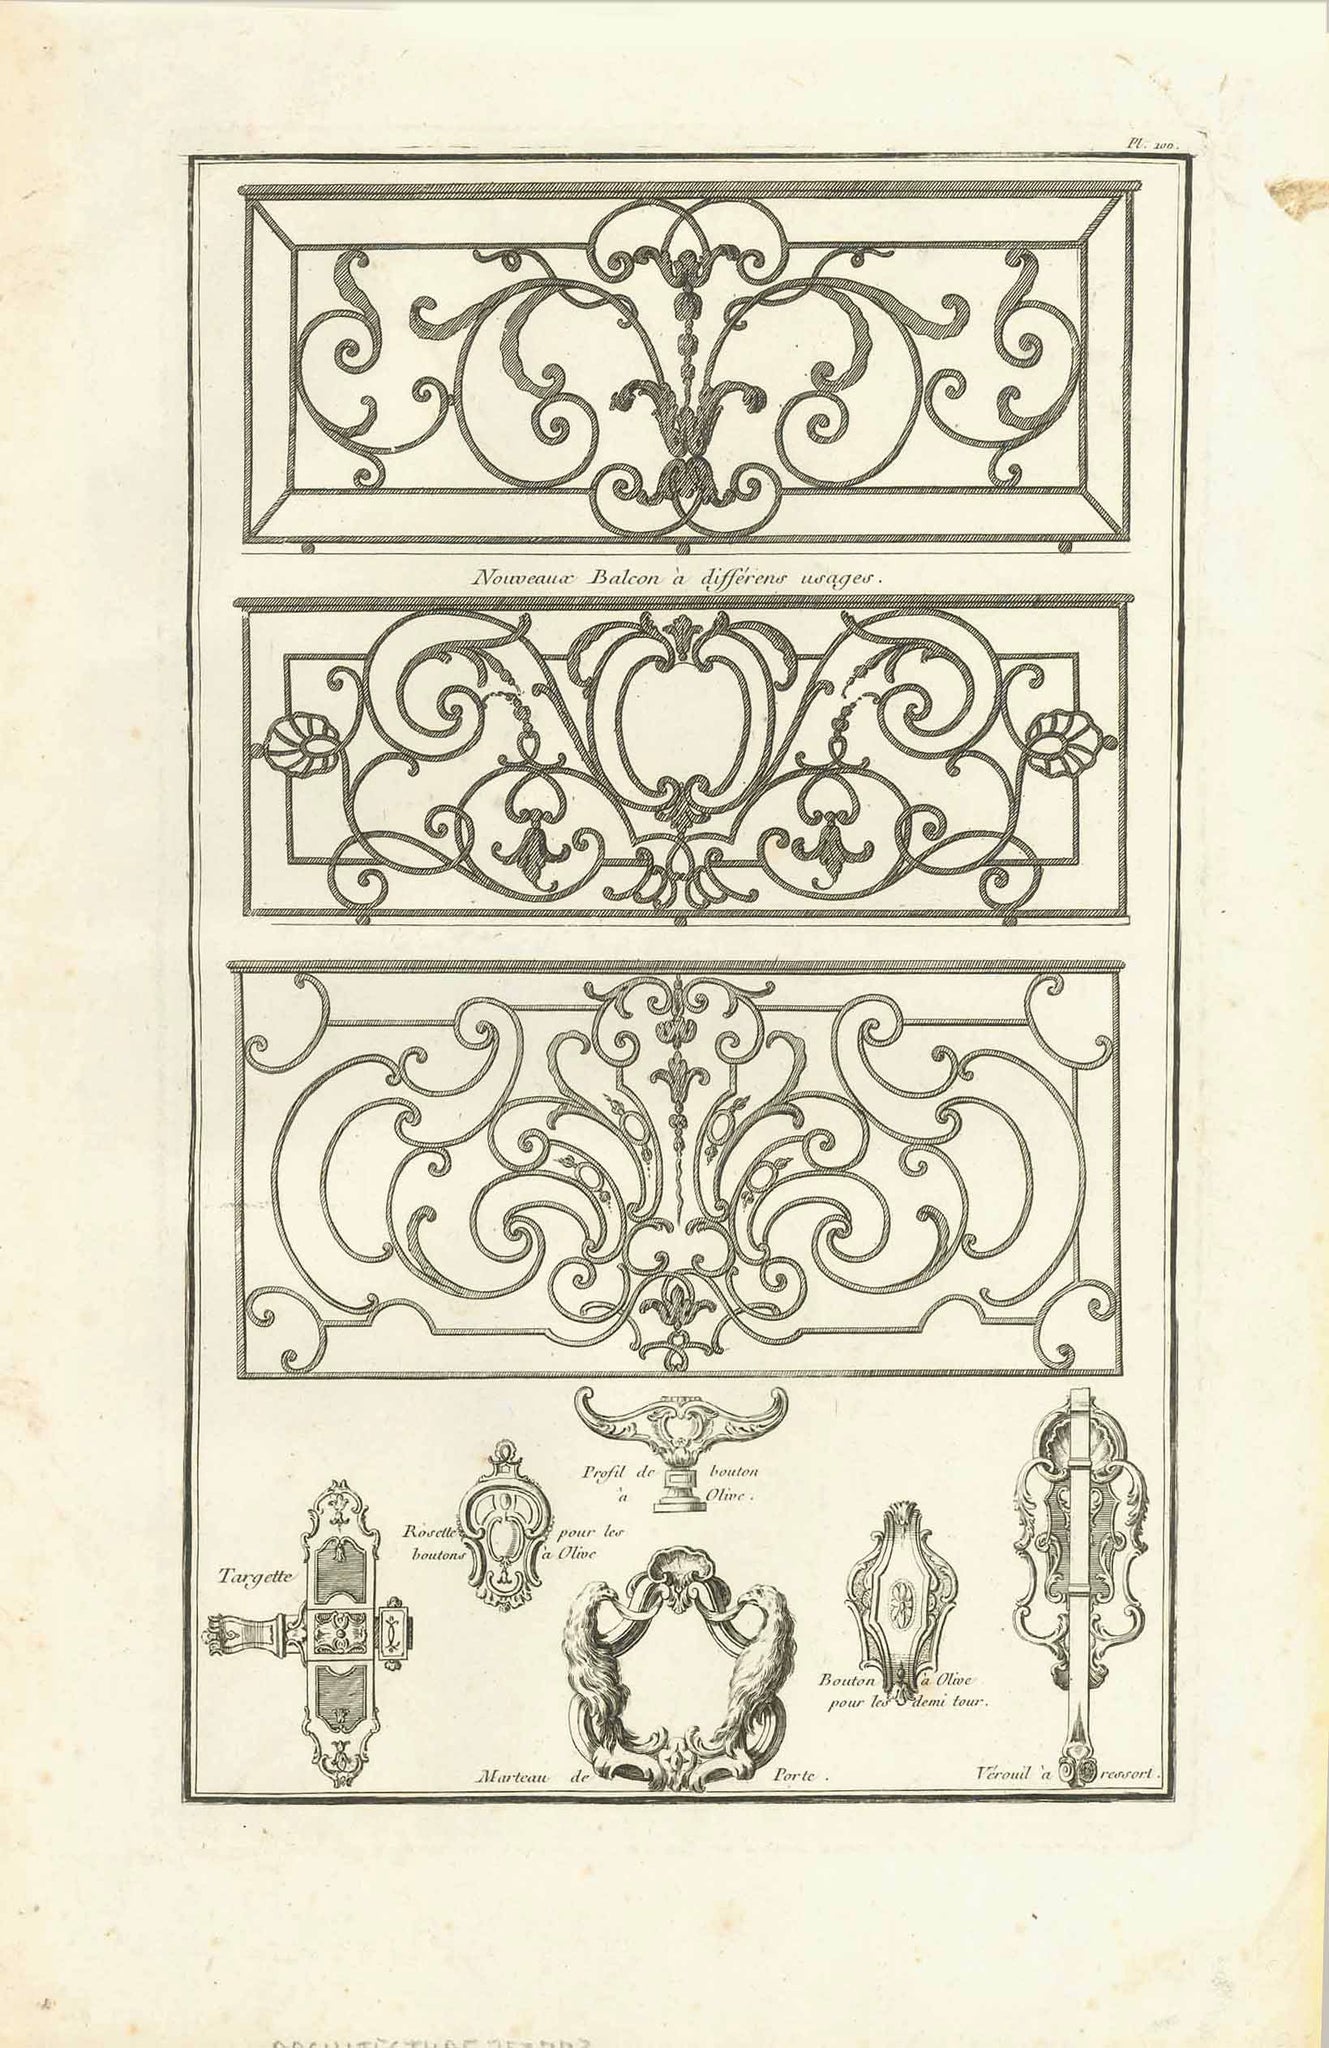 No title. Wrought Iron balcony railings and samples for bits and pieces  Copper etching  Published in "Traite elementary pratique d'architecture ou étude des cinq ordres"  - Regula delle cinque ordini d'architettura  By Barozzi da Vignola (1507-1573)  Original Italian edition was printed in 1562. Our prints are from the French edition. Paris, 1767  Page 100 from this work.  Original antique print 